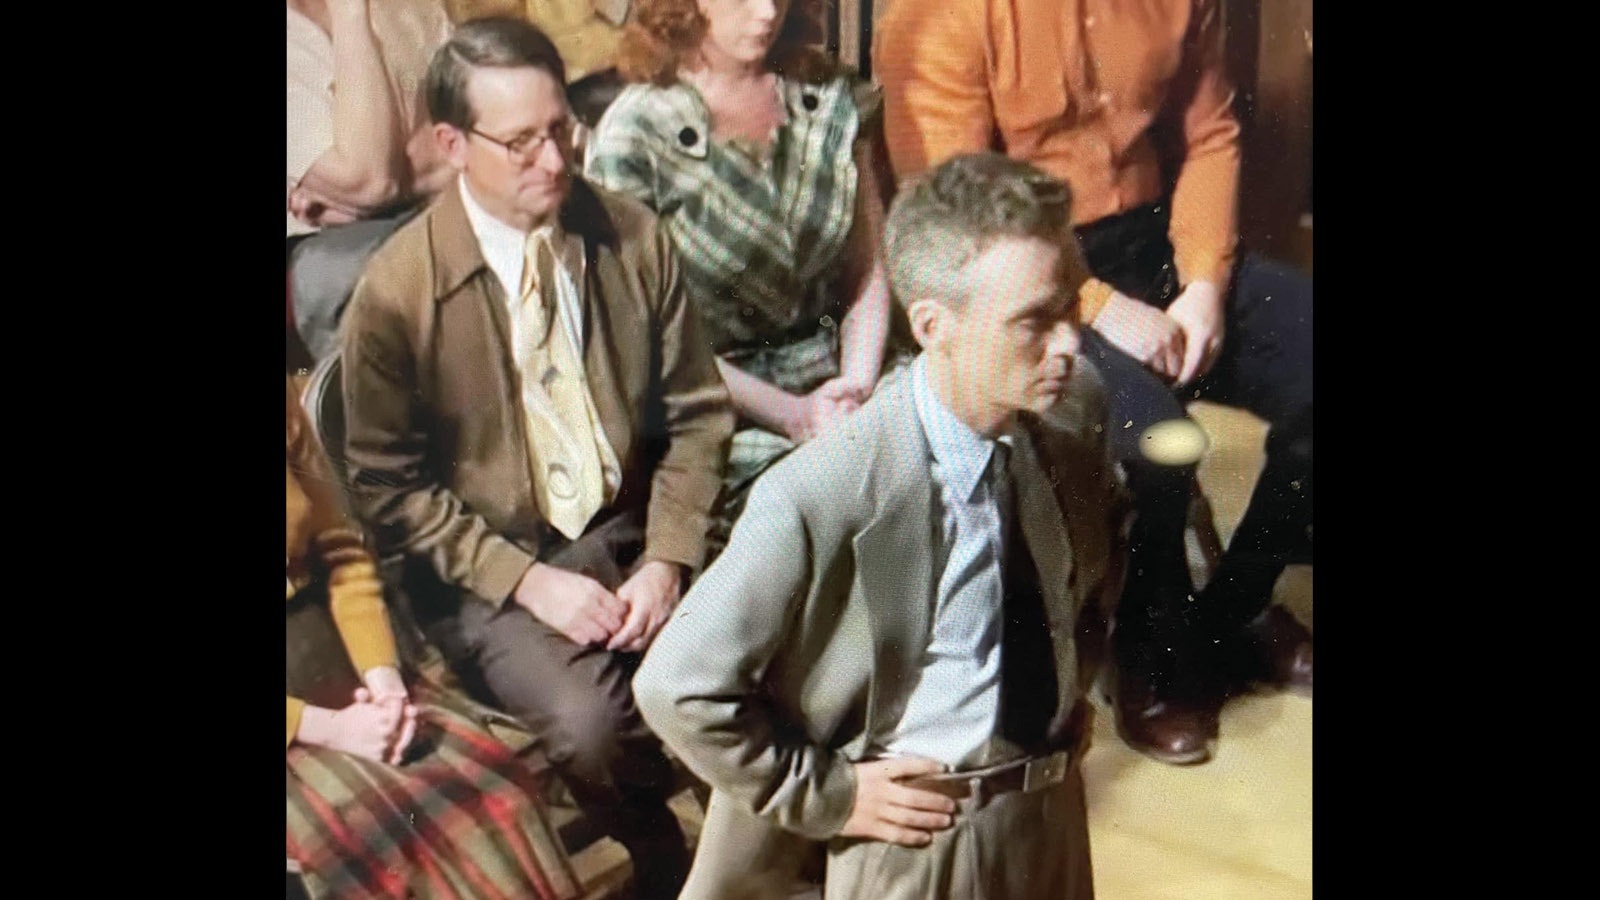 Garth Dowling sits behind Cillian Murphy in a scene from "Oppenheimer."